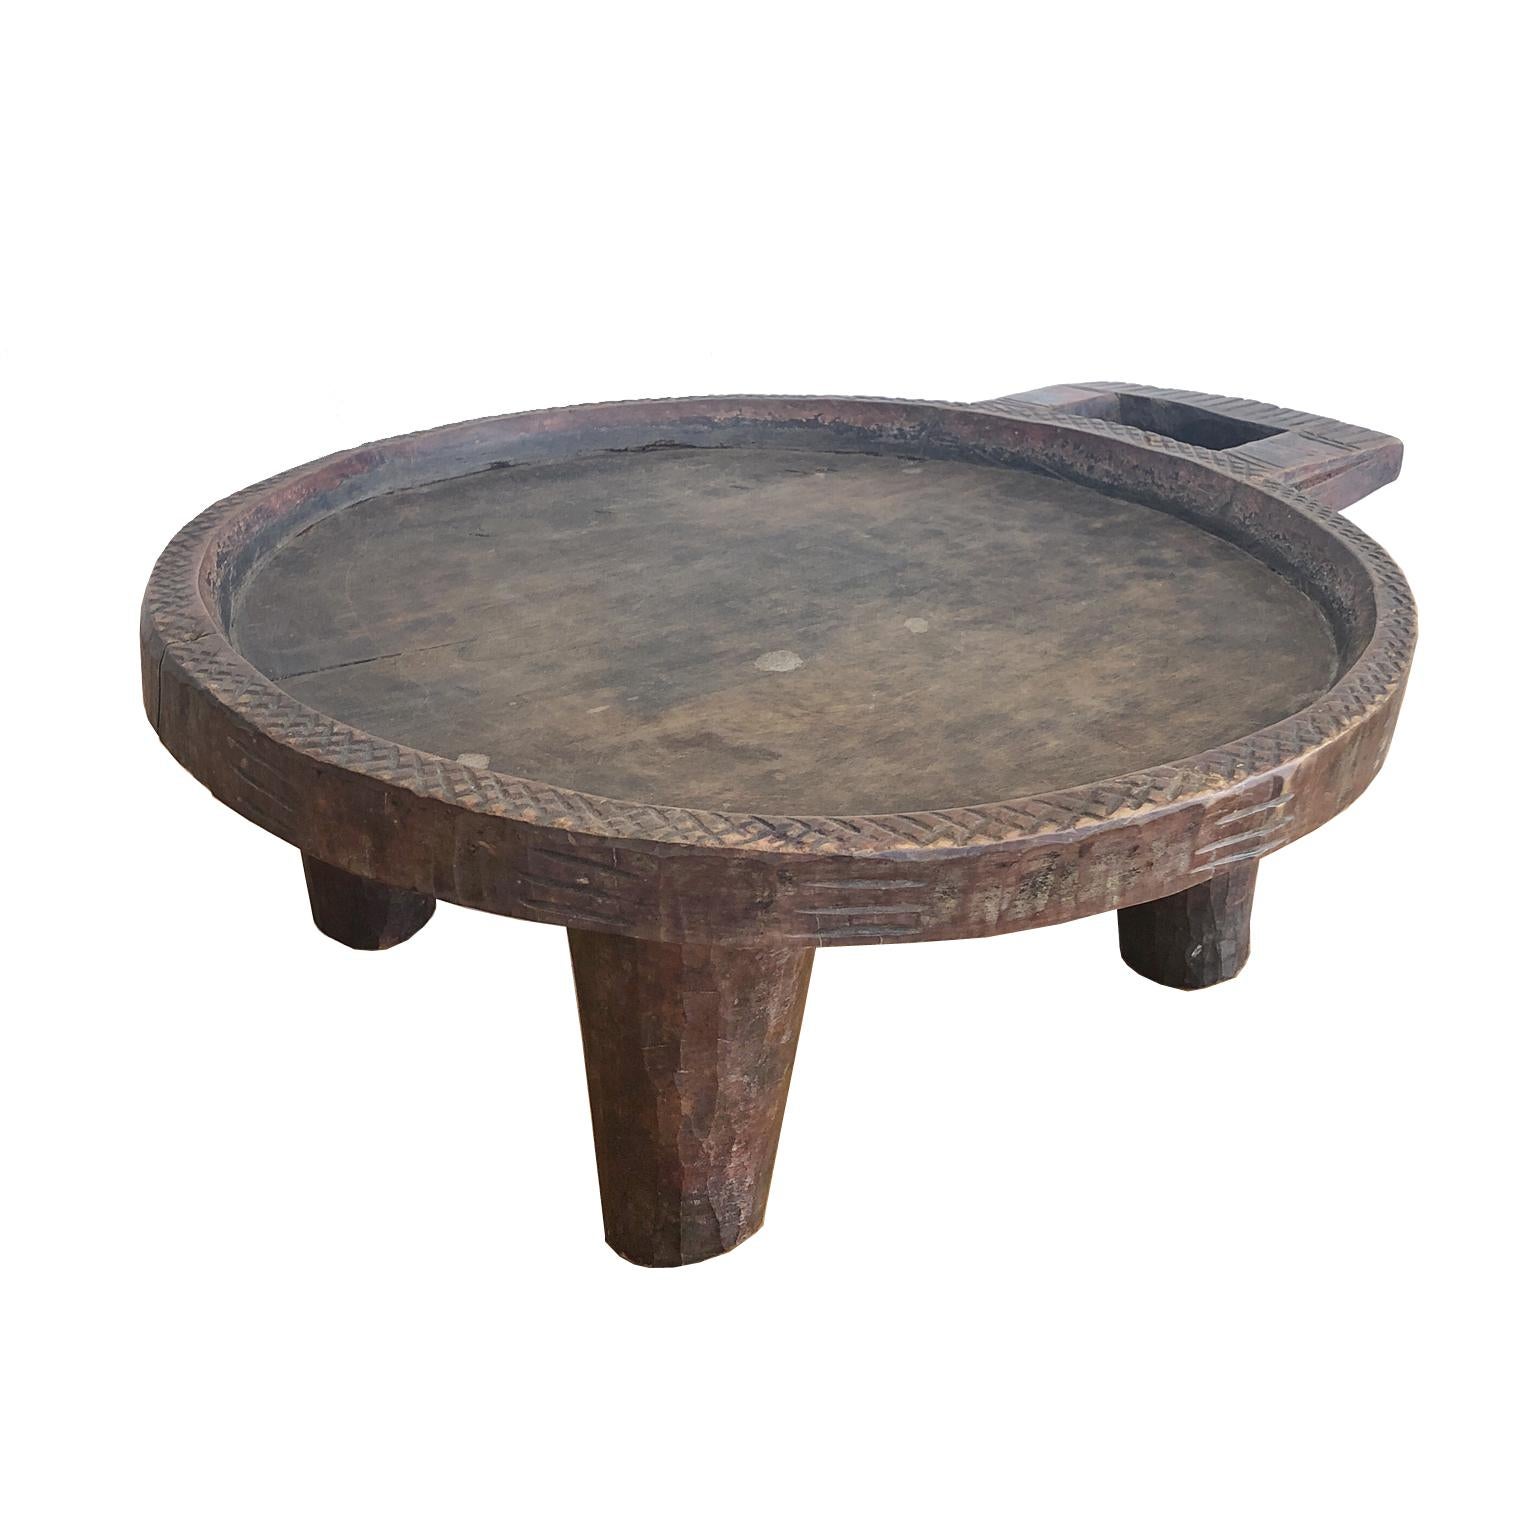 An Ethiopian coffee tray carved out of a single piece of wood with round tray and handle resting on four legs, from the Gurage zone, named from the Gurage People. Incised geometric carvings embellish the border and handle. Gurage is a Zone in the